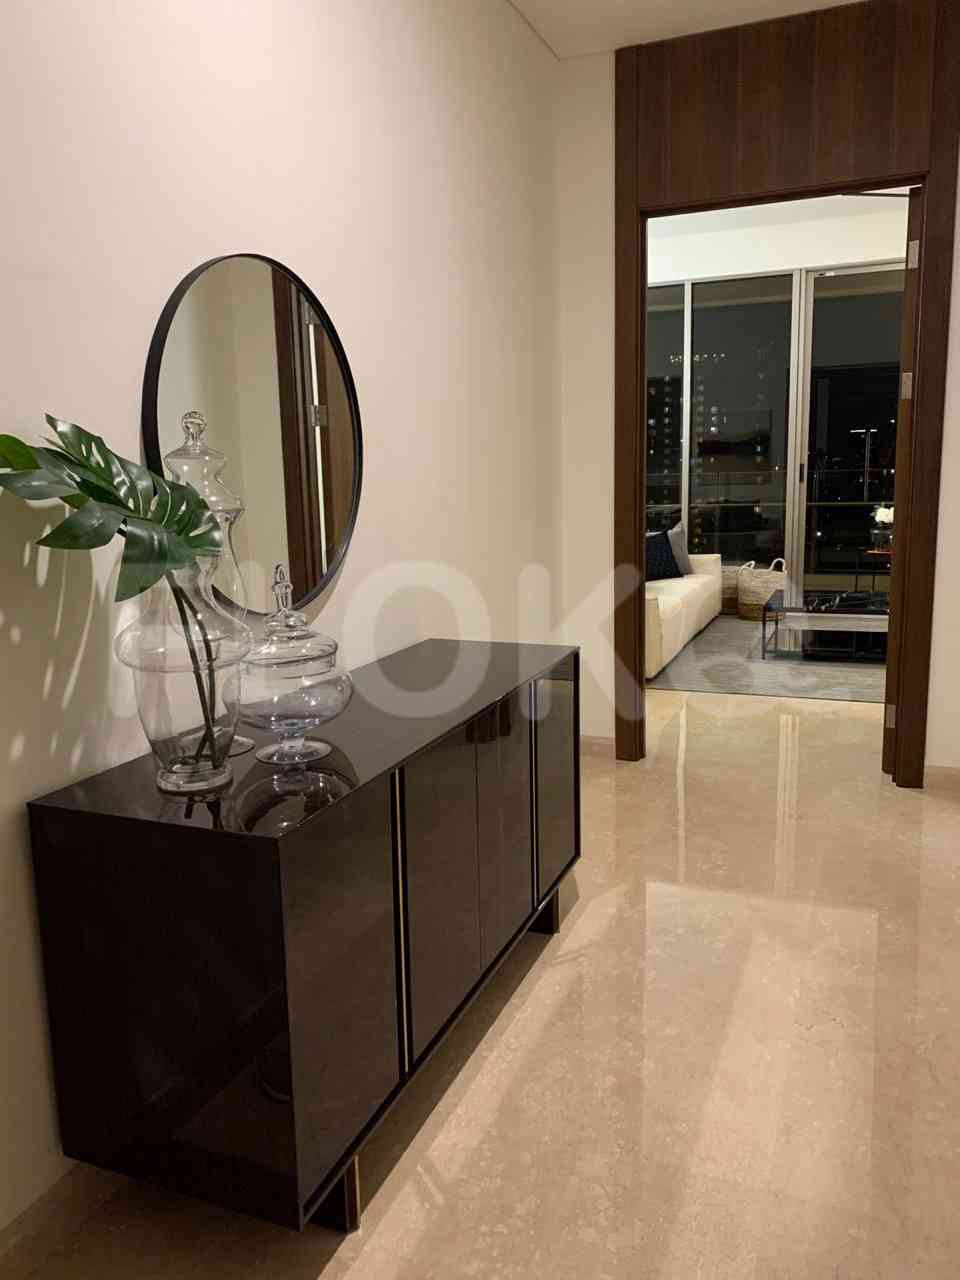 2 Bedroom on 18th Floor for Rent in Pakubuwono Spring Apartment - fga597 6